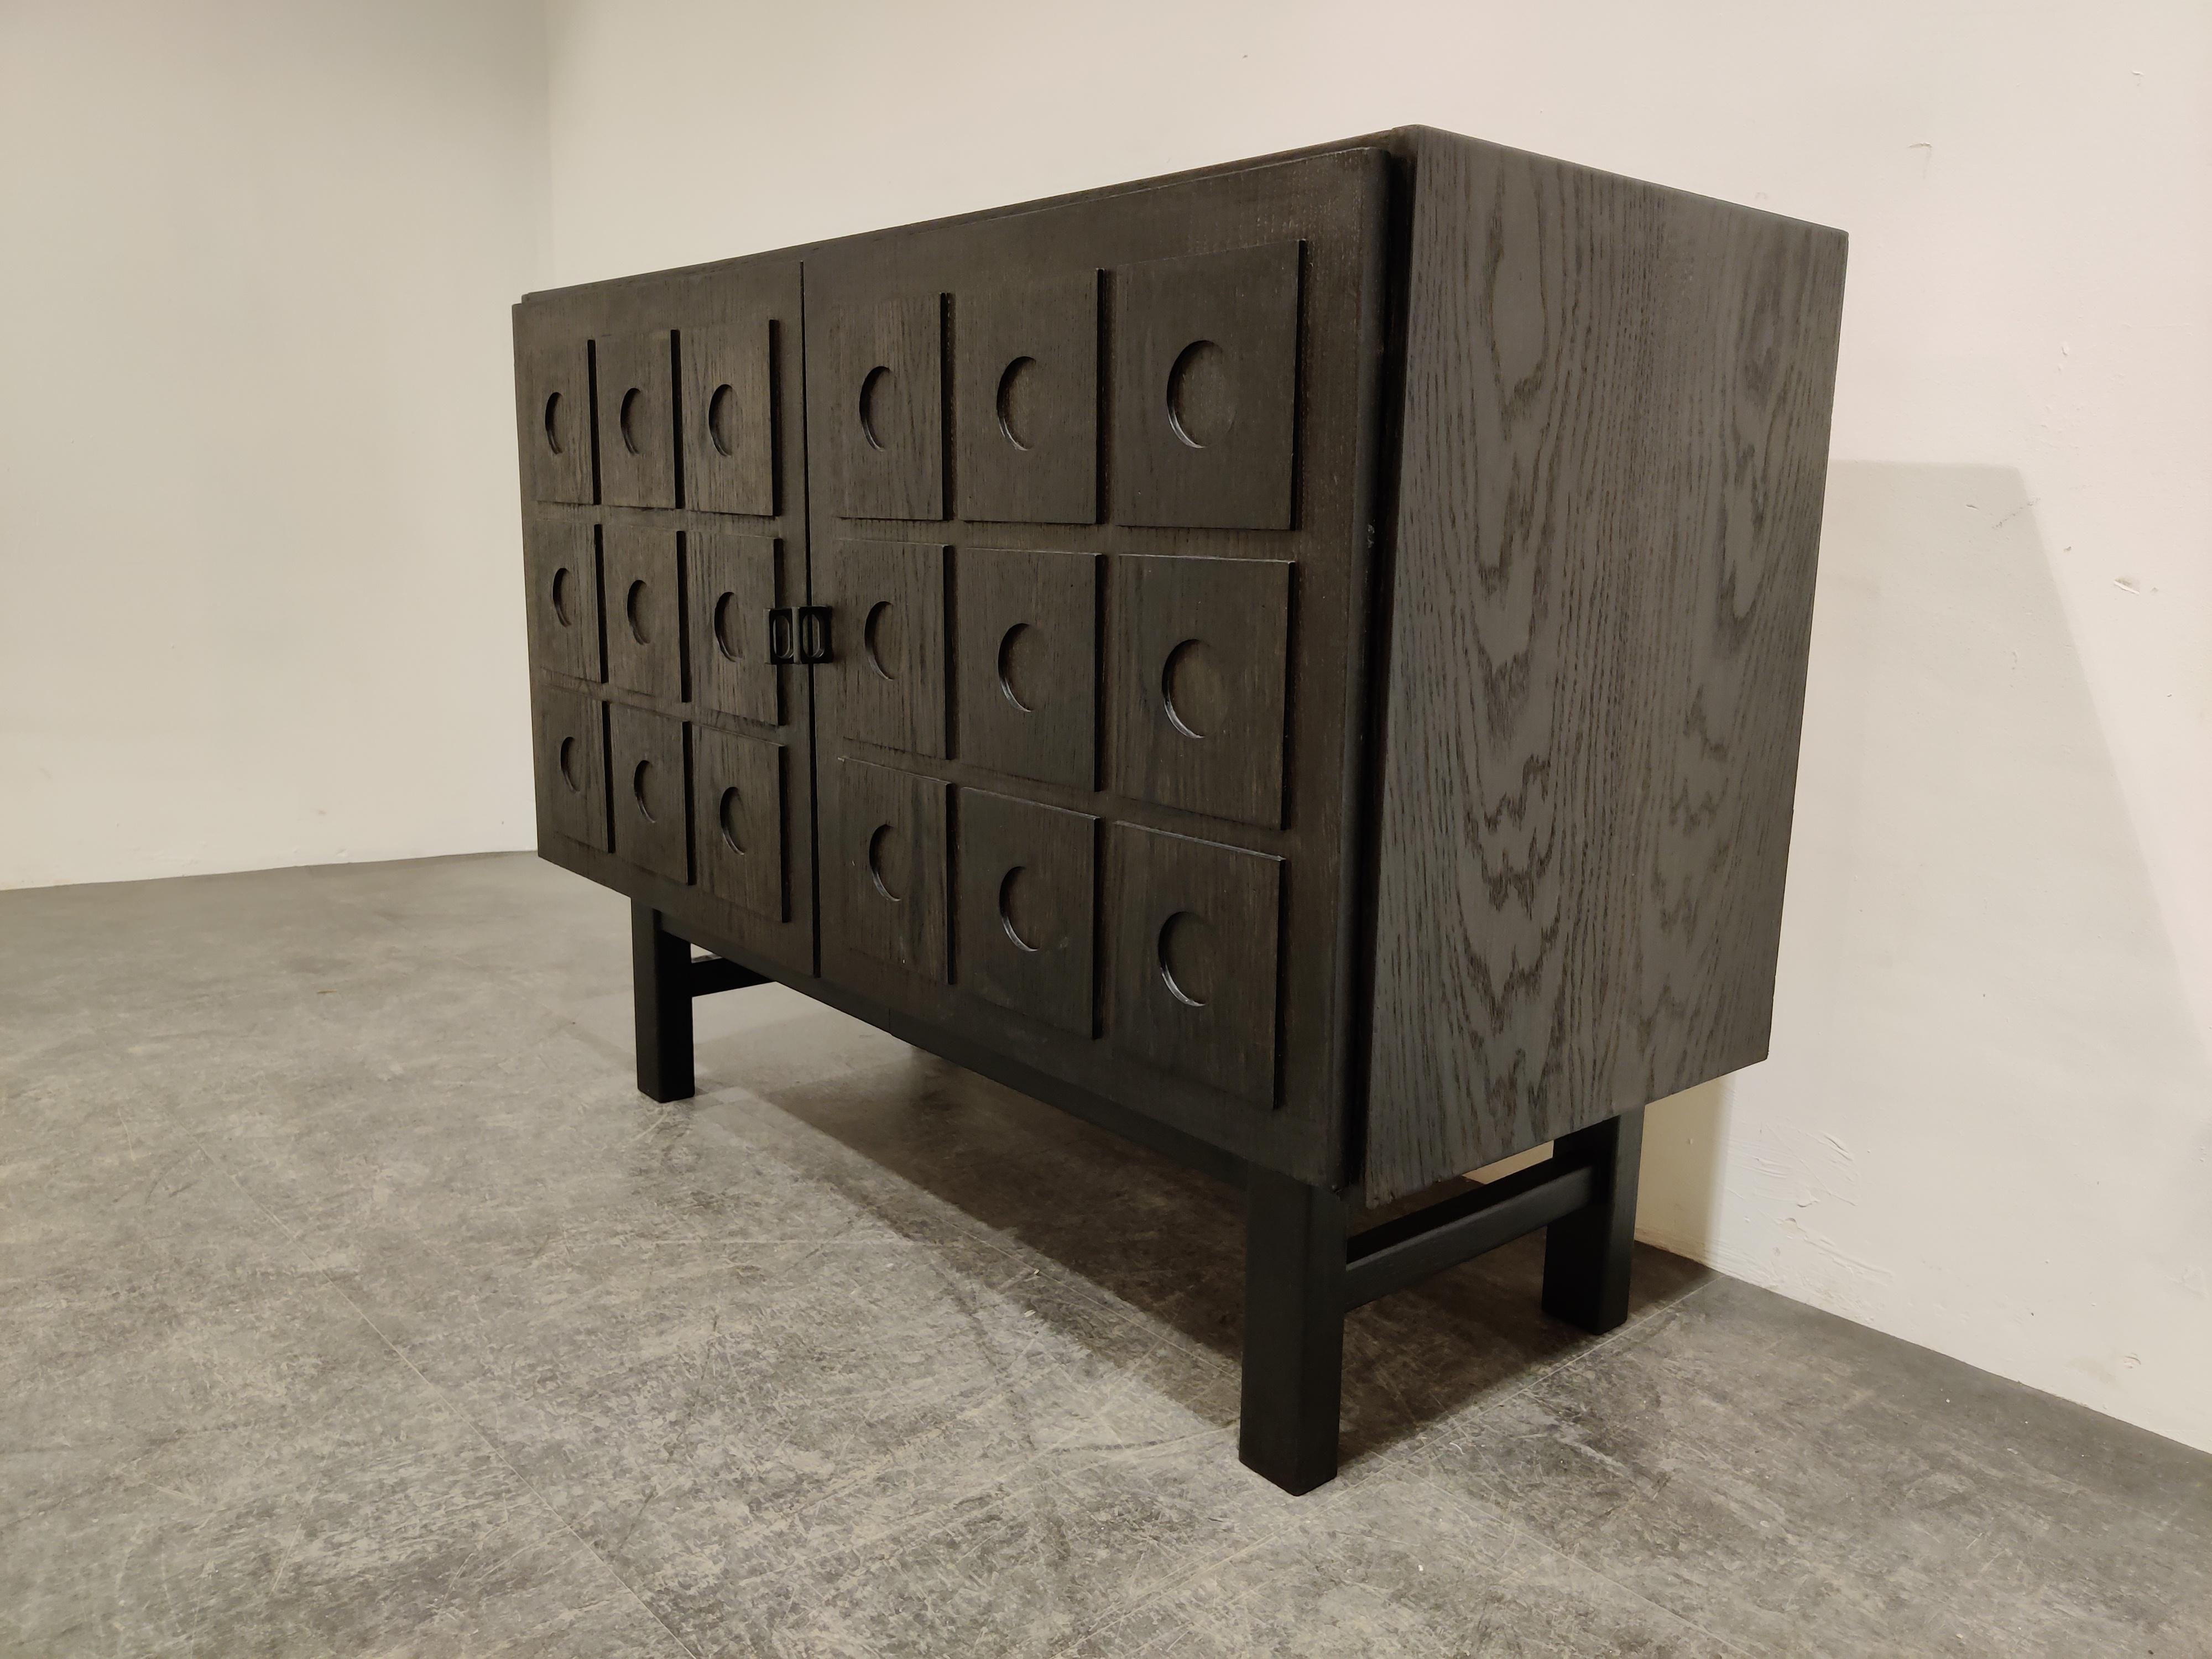 Beautiful ebonized oak brutalist side cabinet.

Graphical design door panels.

The cabinet has 5 drawers and one shelve.

Eye catching and timeless piece.

Very good condition

1970s - Belgium

Dimensions:
Height: 83cm/32.67